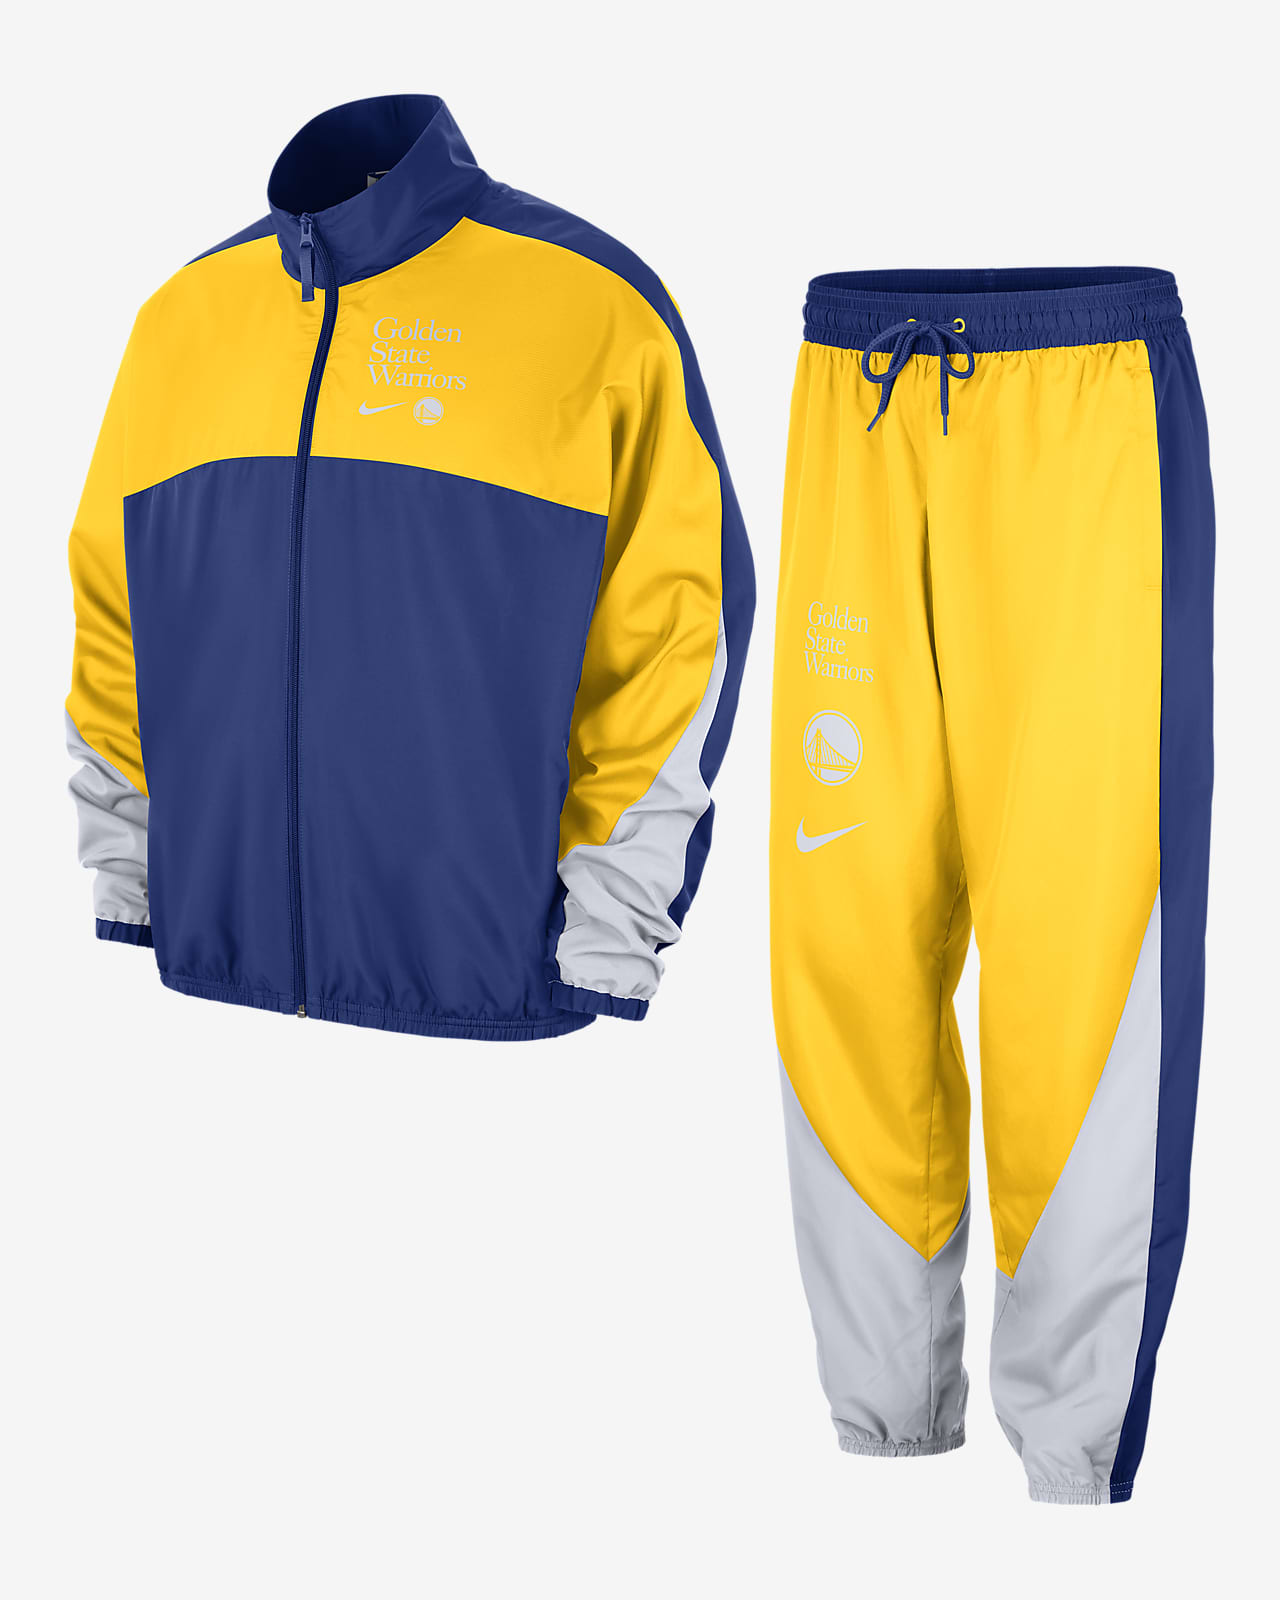 Golden State Warriors Starting 5 Courtside Men's Nike NBA Graphic Tracksuit